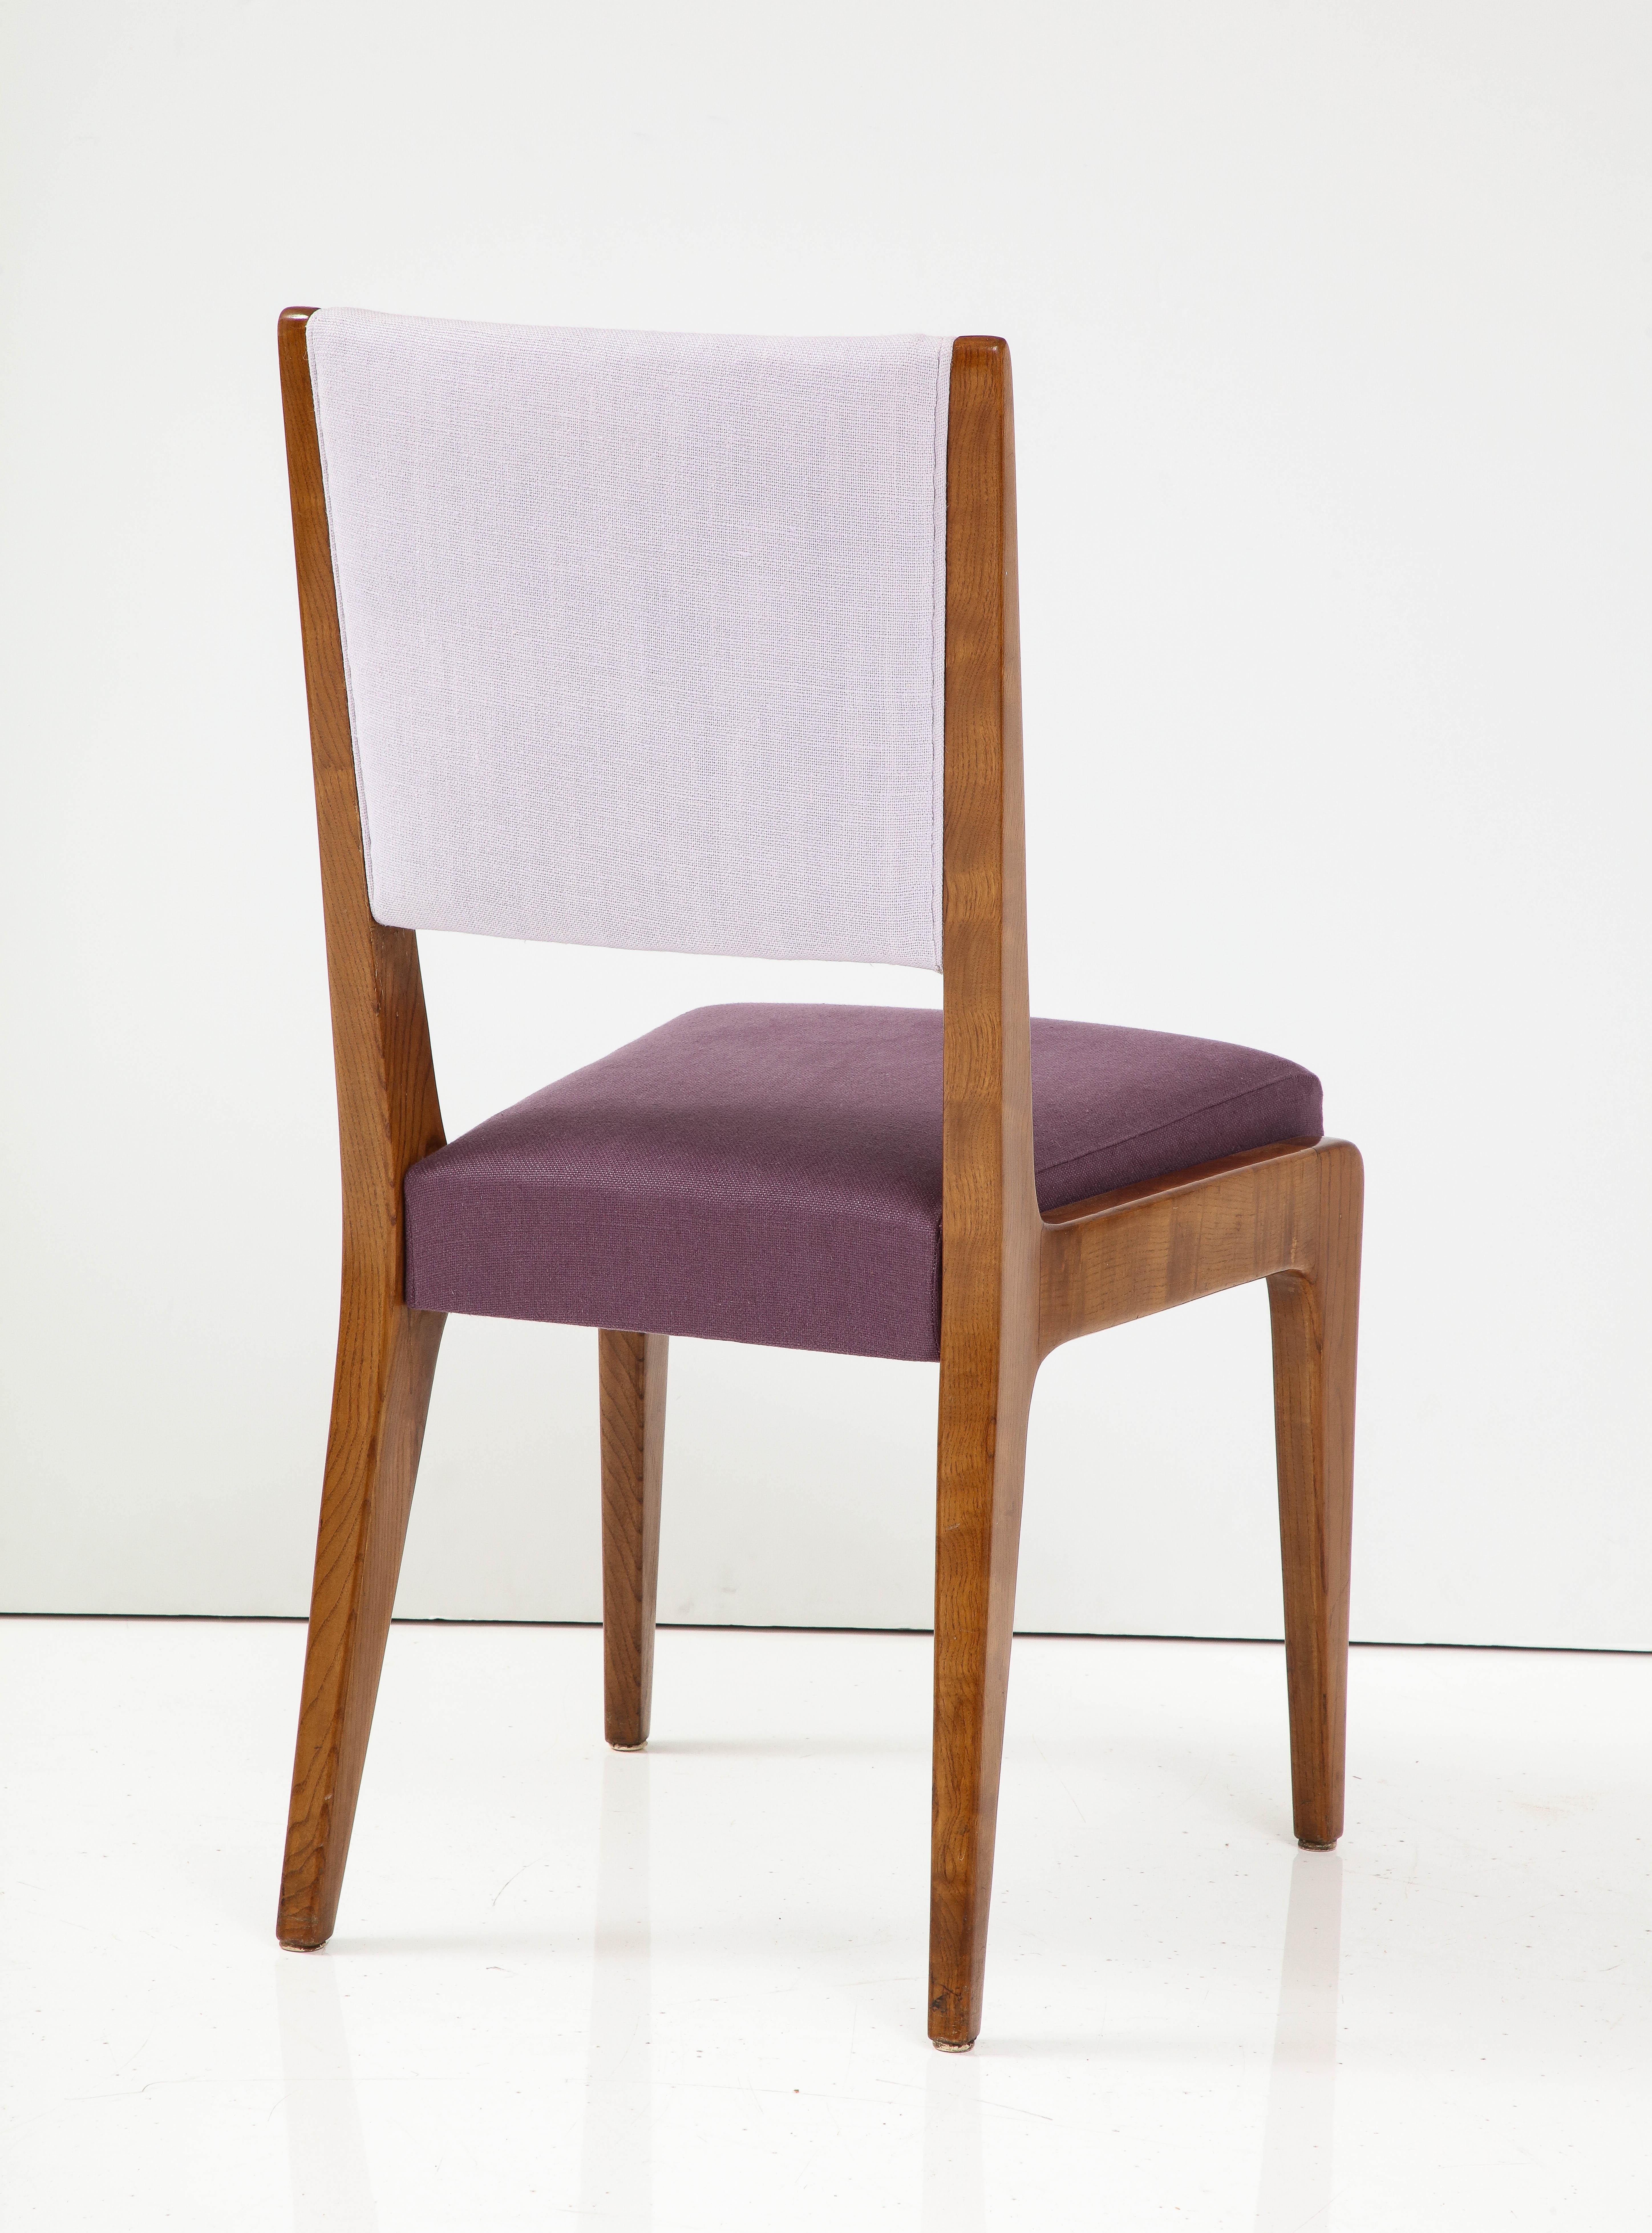 Linen Upholstered Oak Chair by Gio Ponti, Italy, circa. 1950s For Sale 4